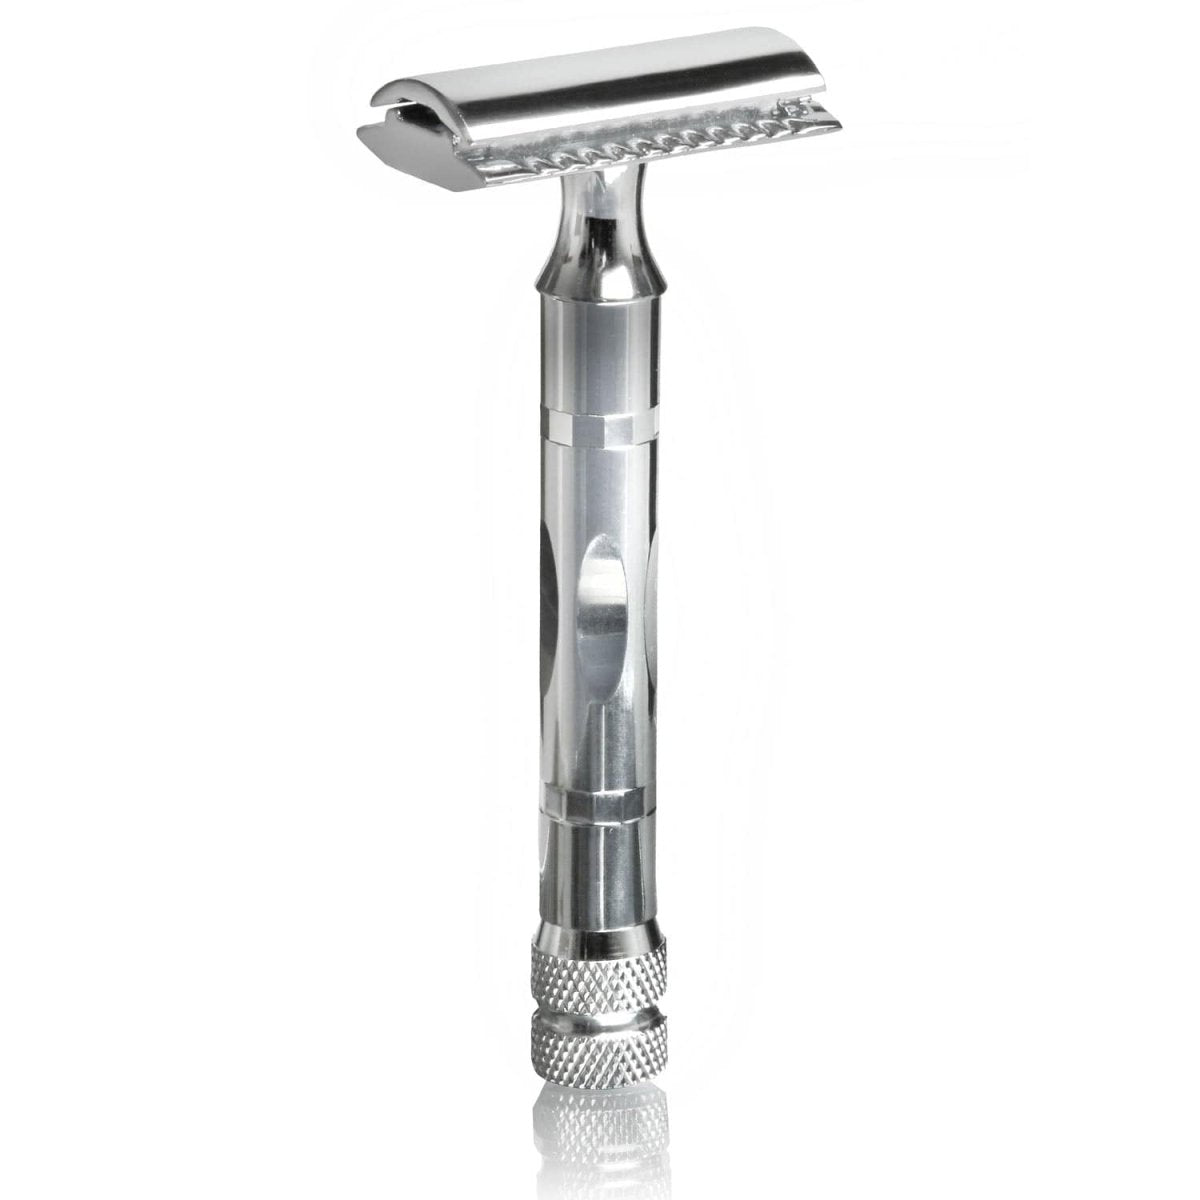 Parker Model 89R Three Piece Safety Razor with Nickel Plated Finish - Shaving Time